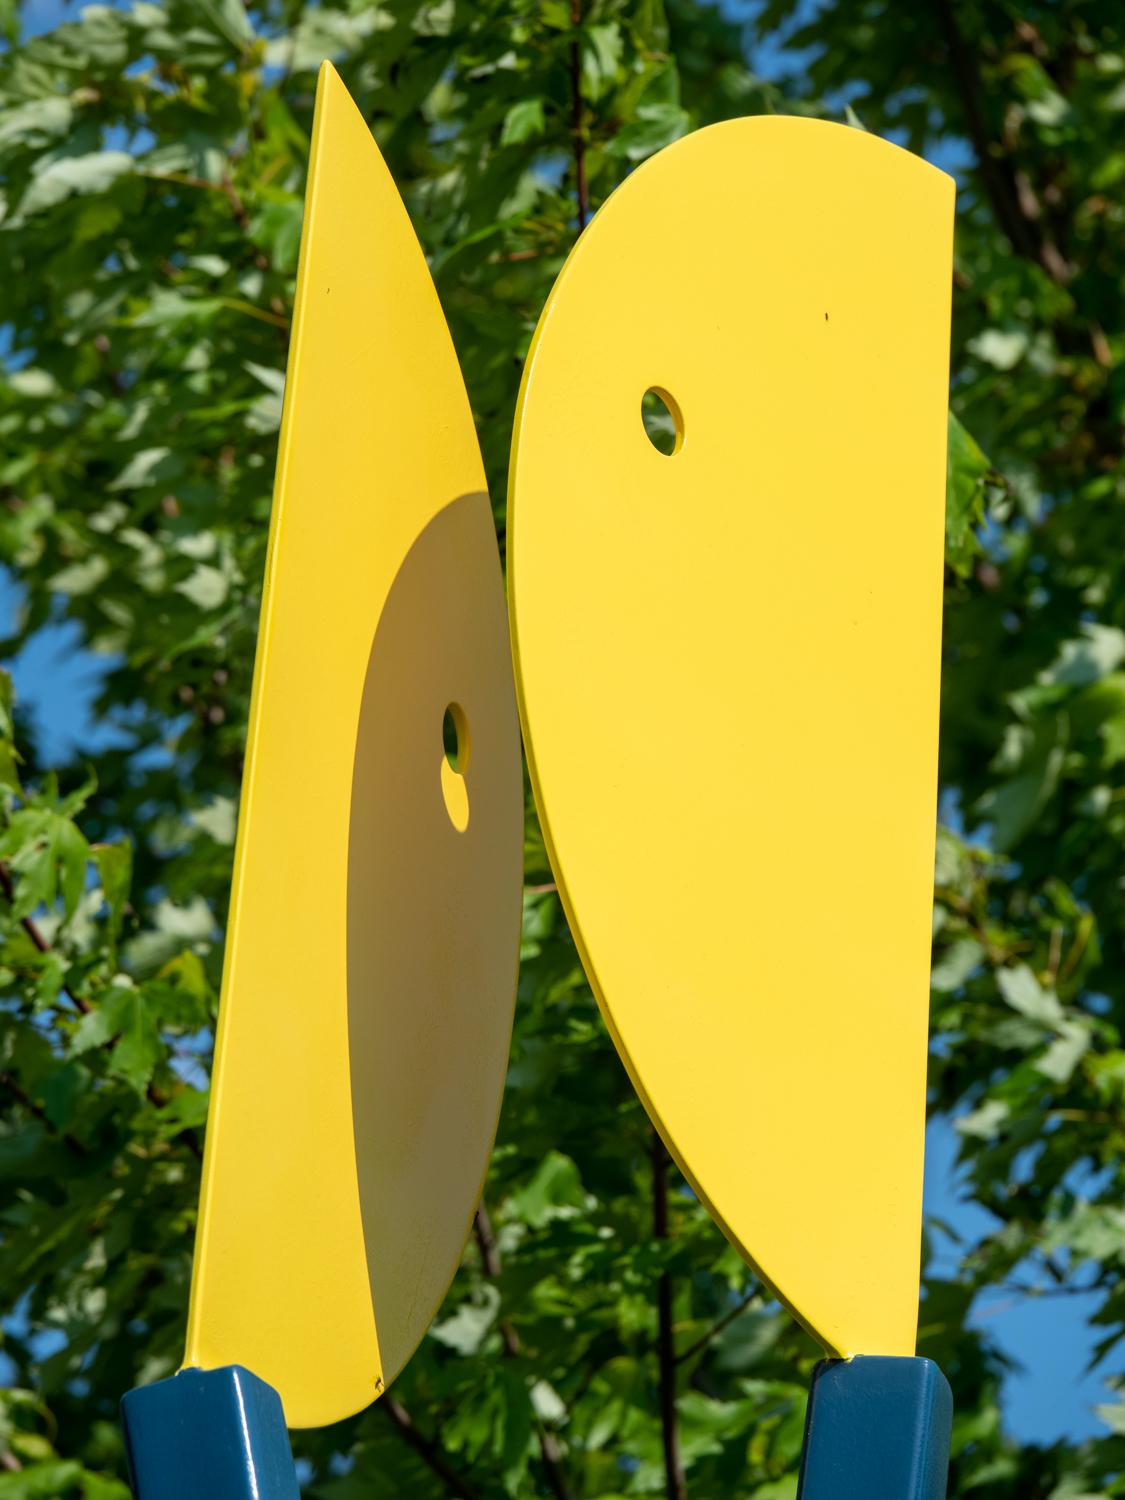 Colourful. Engaging. Minimalist. Theatrical. That describes the work of Robert Clarke-Ellis. The Toronto sculptor creates accessible pieces that although playful in form often speak to serious values. This piece features two abstract shapes forged